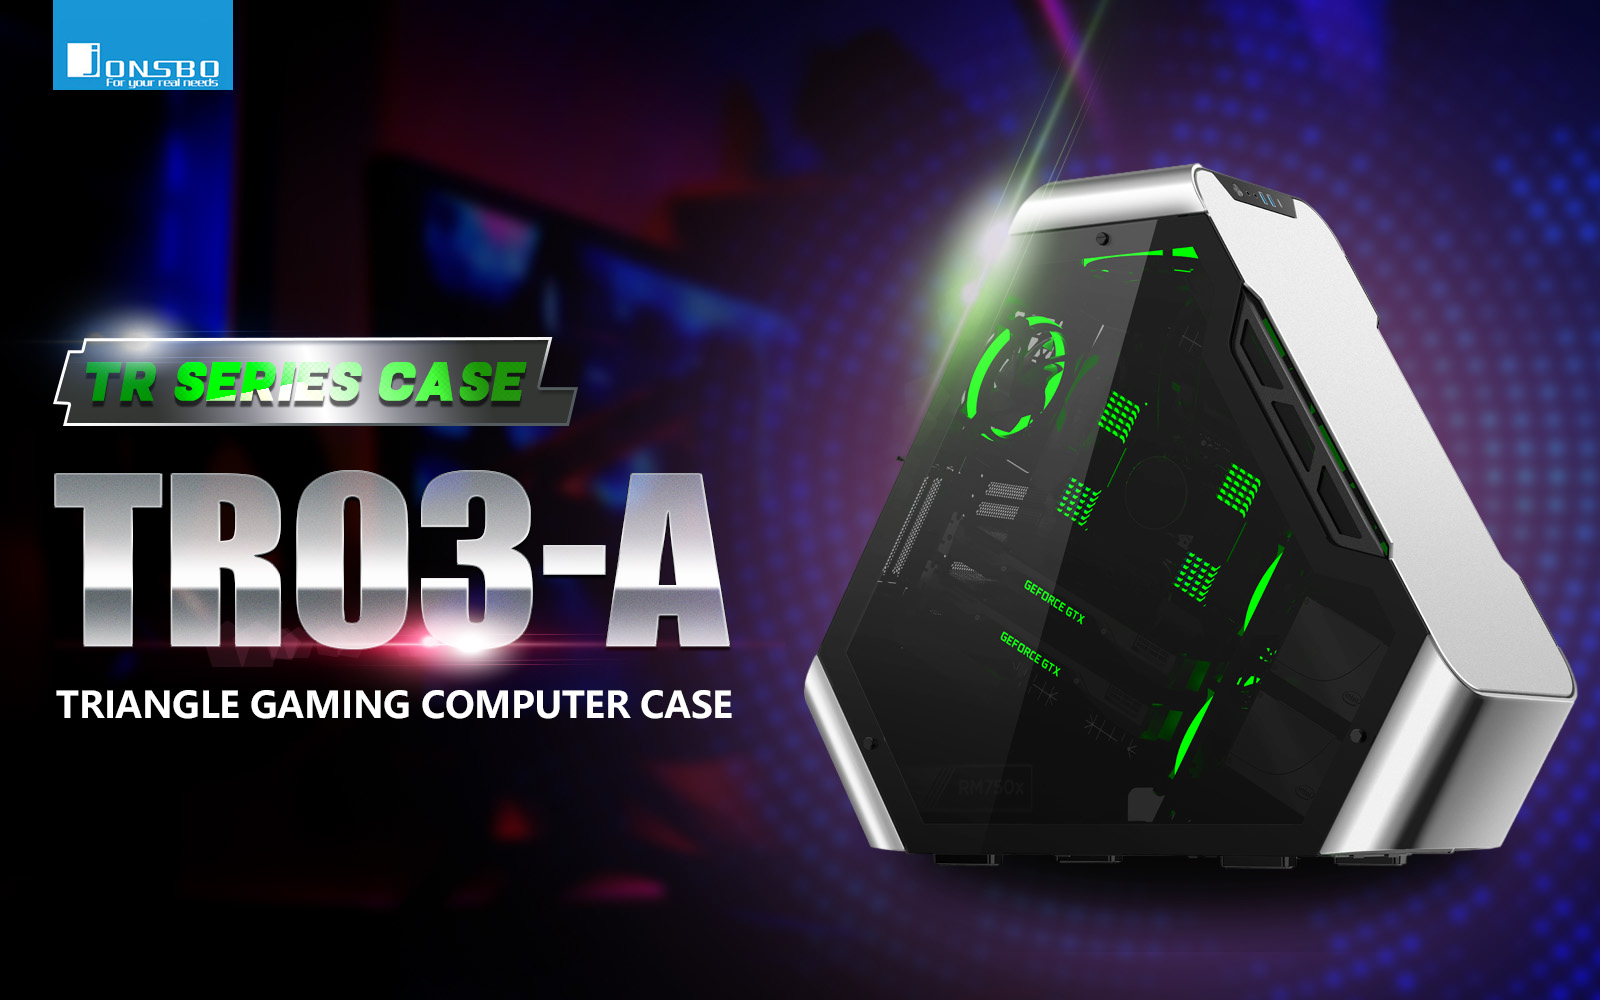 JONSBO TR03-A ATX Triangle Gaming Computer Case